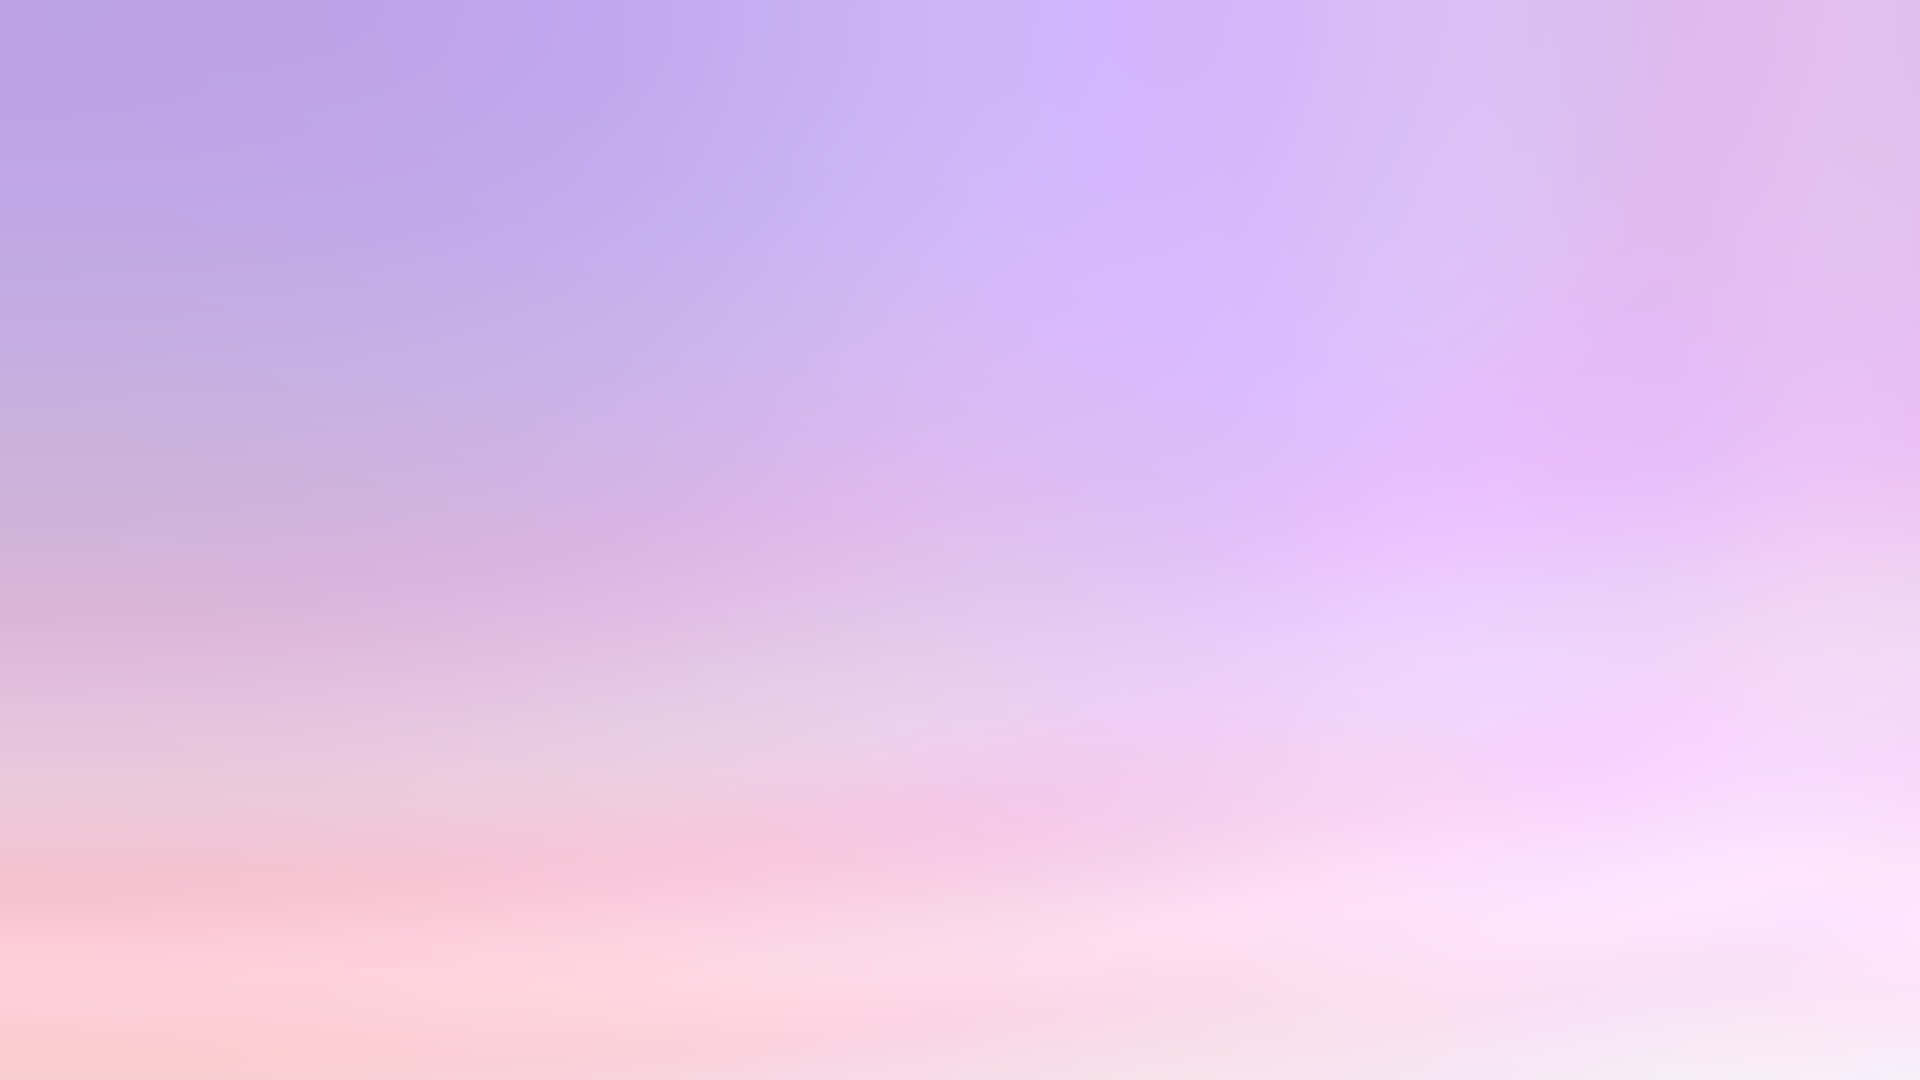 A Pink And Purple Abstract Background